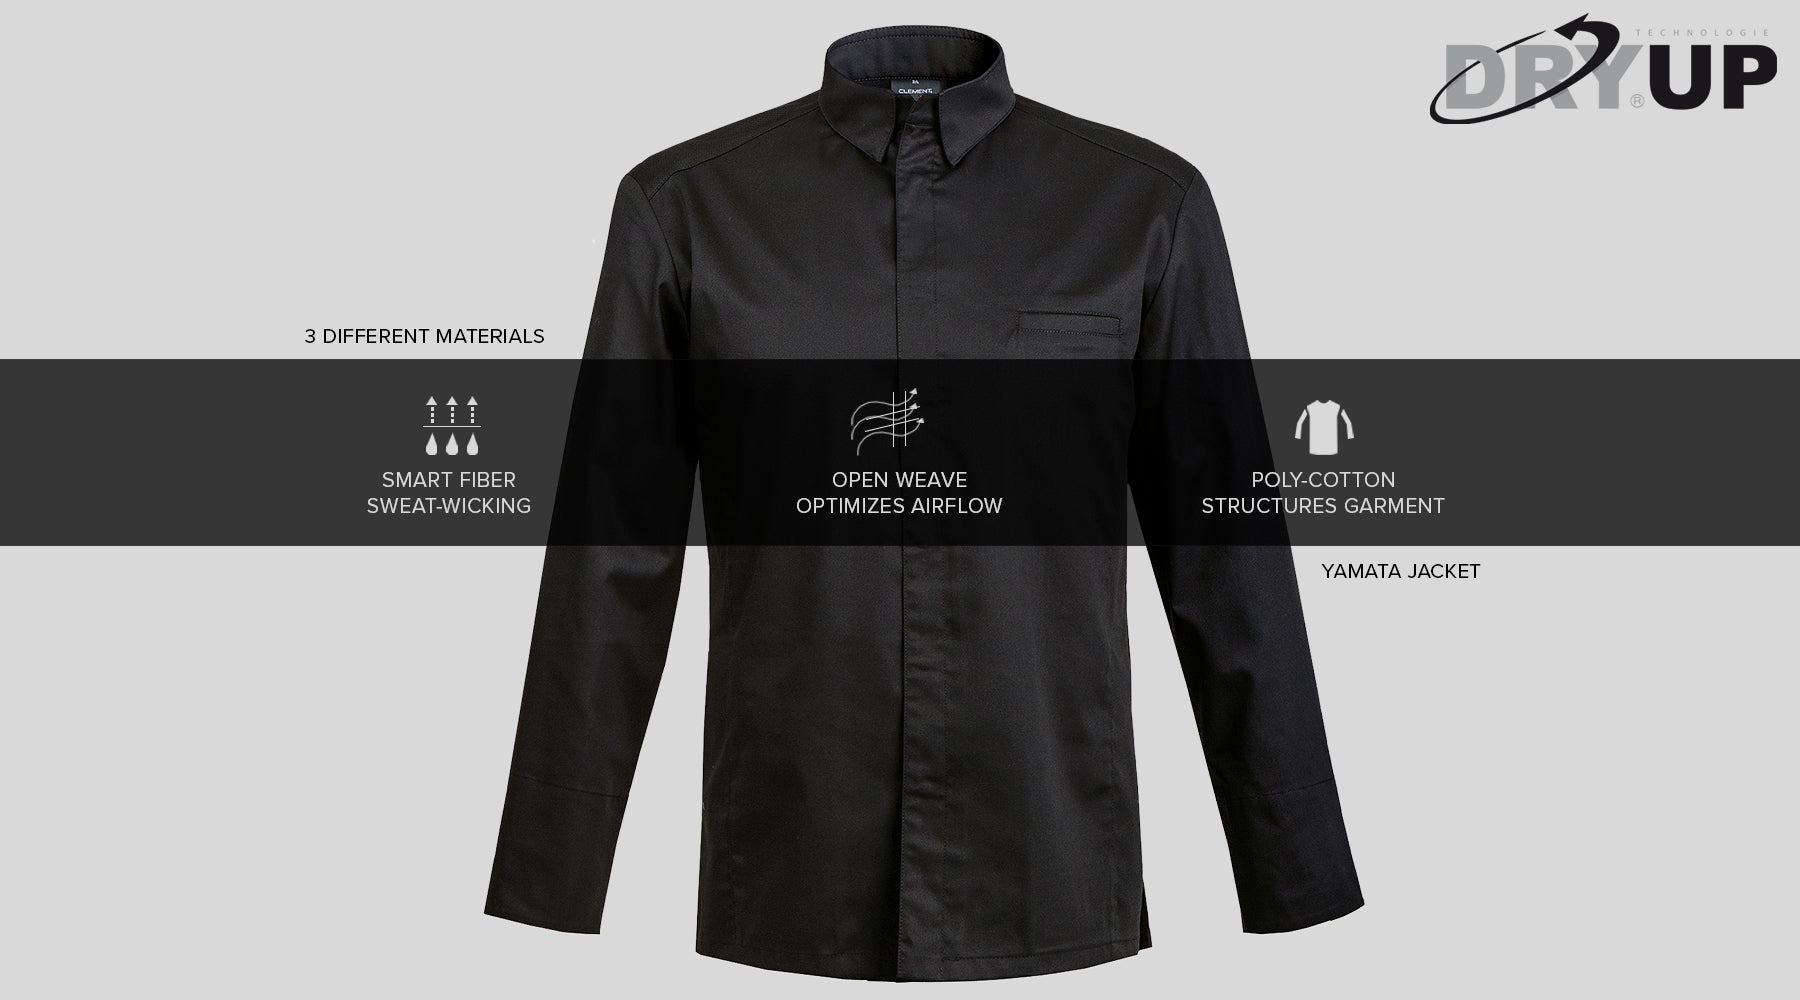 Men's Dry-Up Chef Jackets